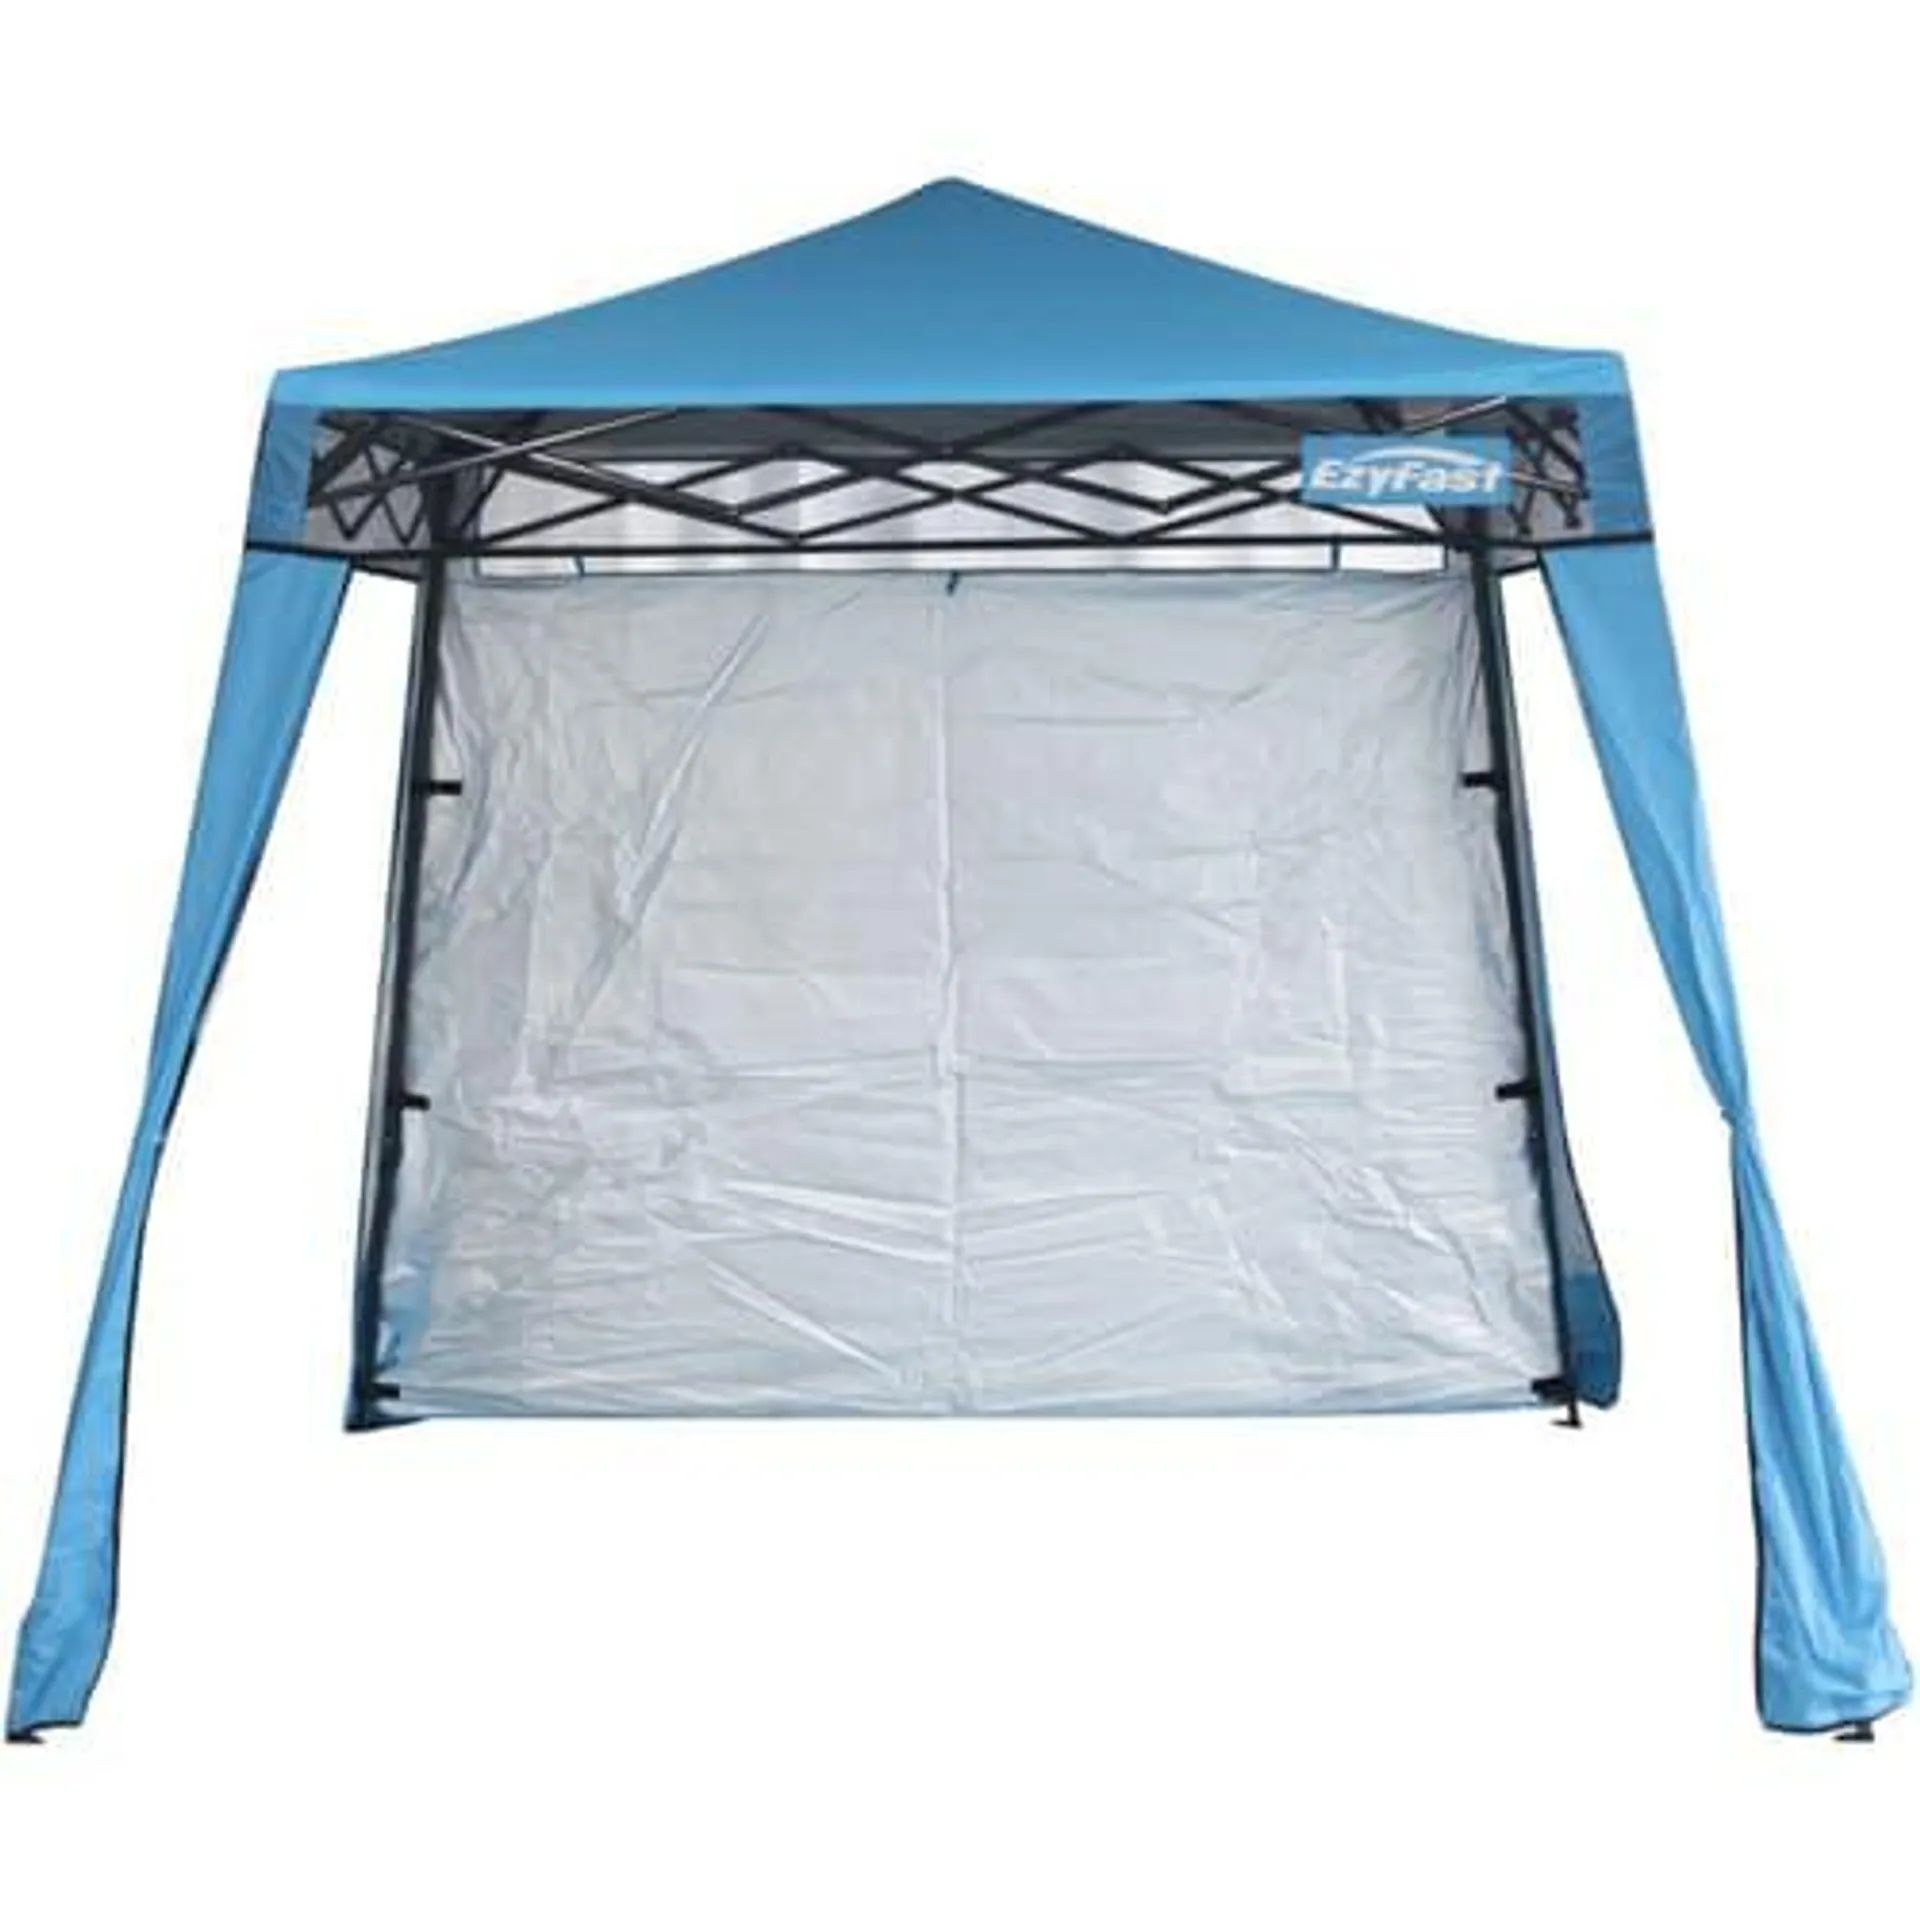 8' x 8' Blue Folding Sun Shelter - with a full sized back wall that is designed to block out the sun and wind and offer privacy, can also be rolled up